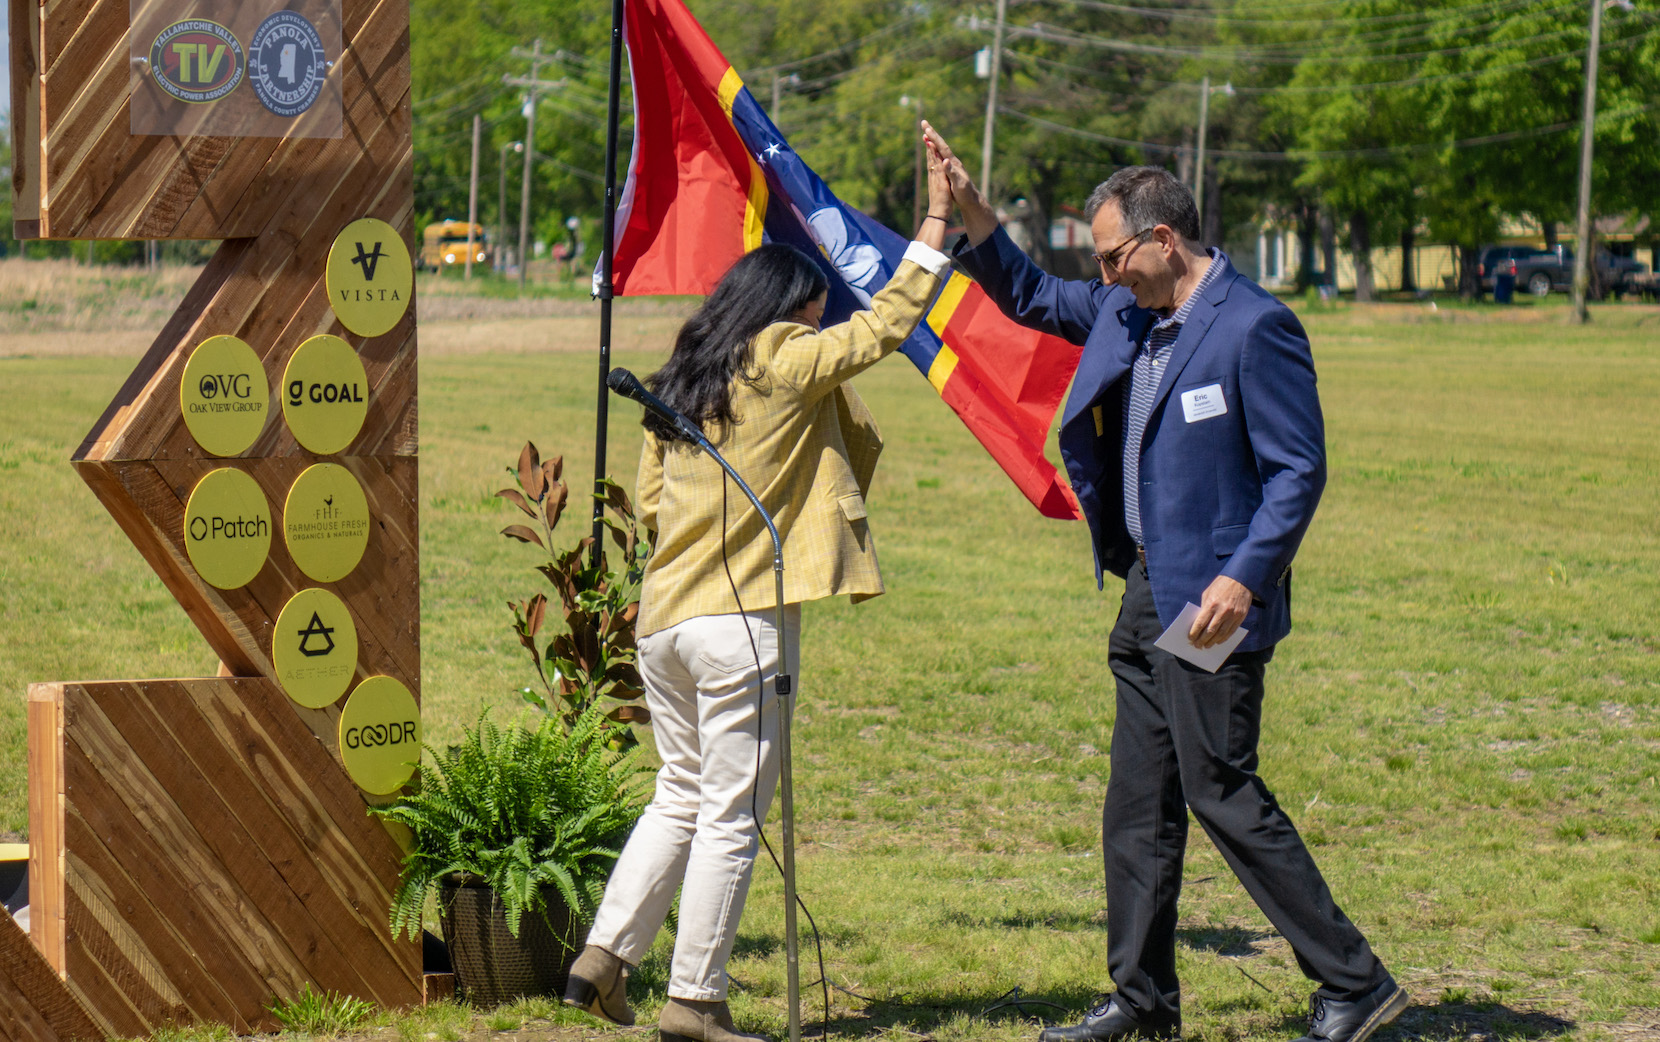 Clearloop CEO and co-founder Laura Zapata high fives Vice Chancellor Eric Kopstain during the Panola County solar farm groundbreaking ceremony